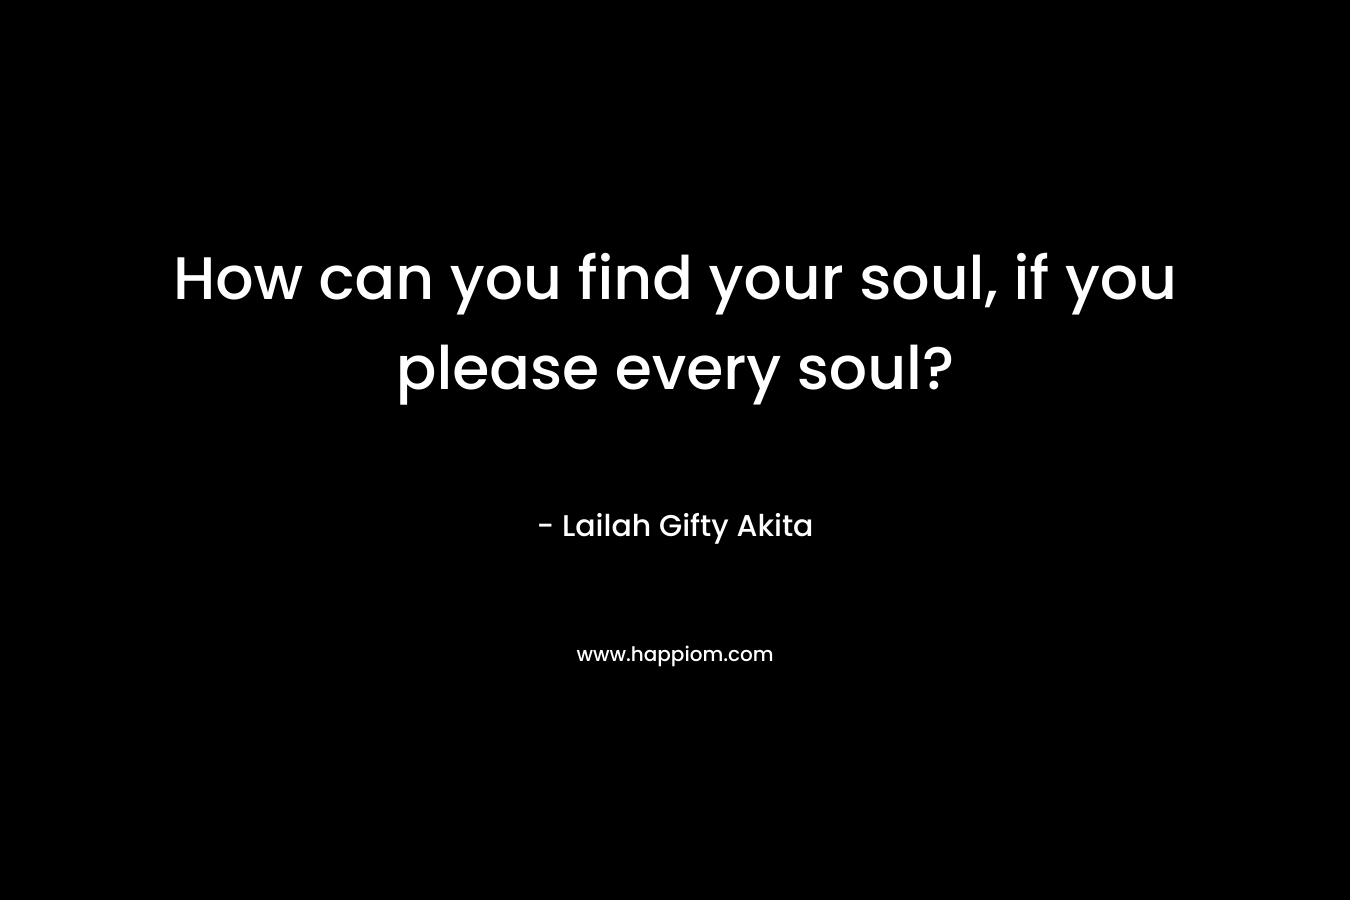 How can you find your soul, if you please every soul?